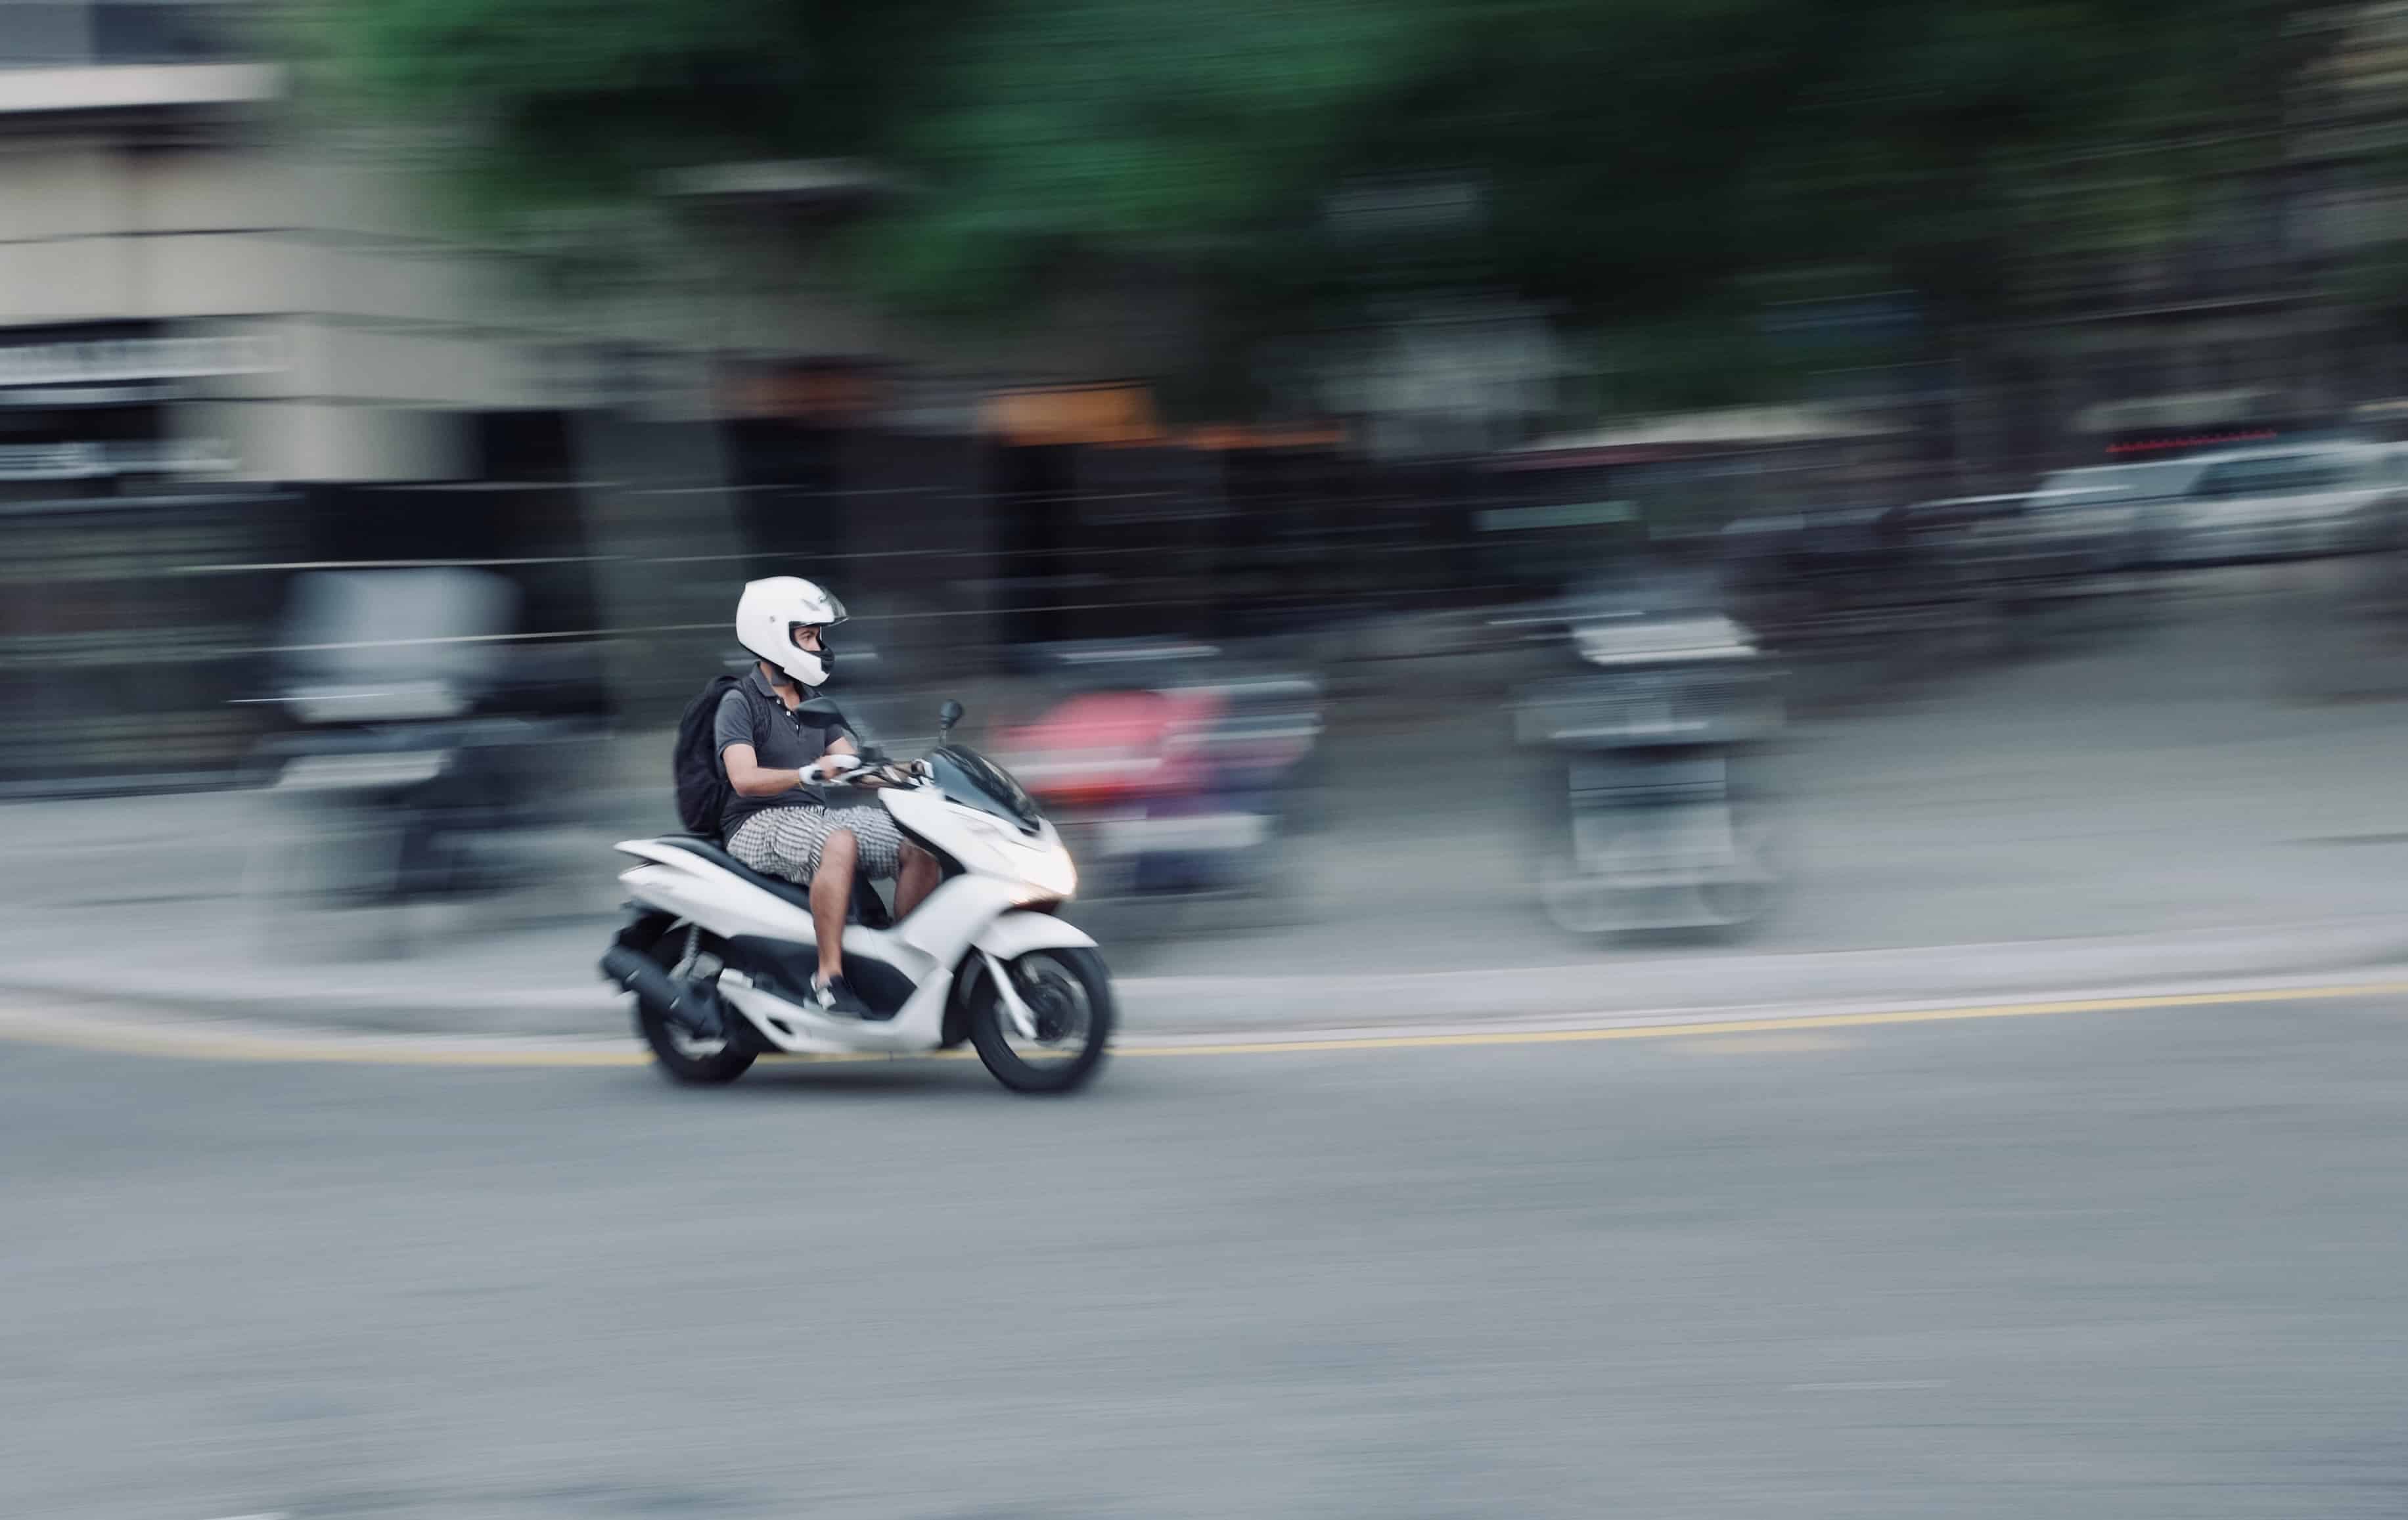 Panning lets you keep the moving subject sharp, while blurring the background.